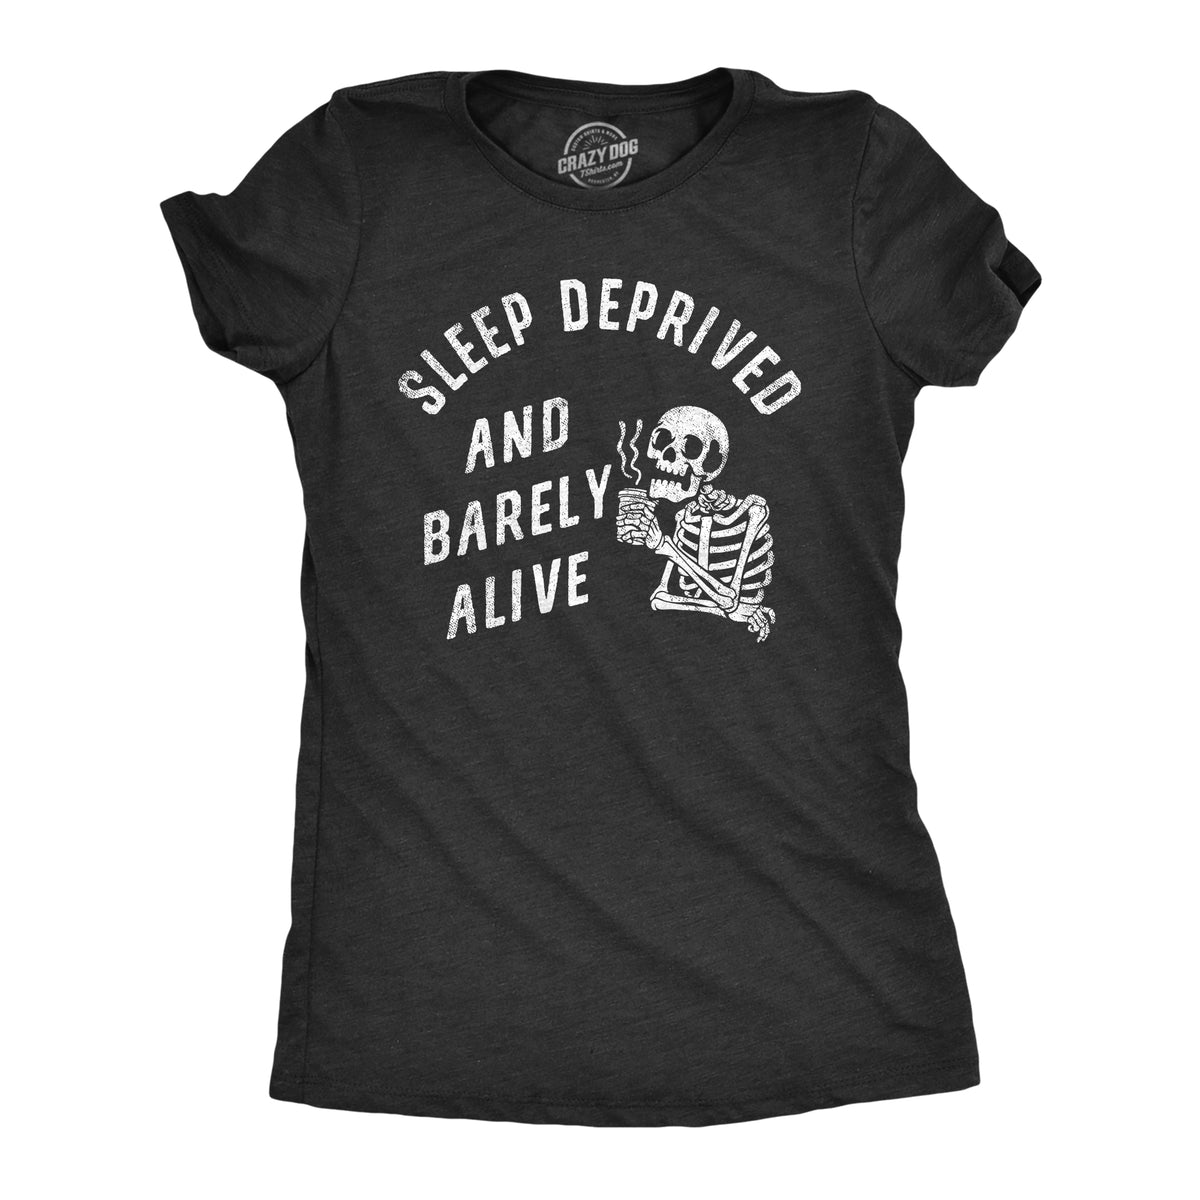 Funny Heather Black - DEPRIVED Sleep Deprived And Barely Alive Womens T Shirt Nerdy sarcastic Tee